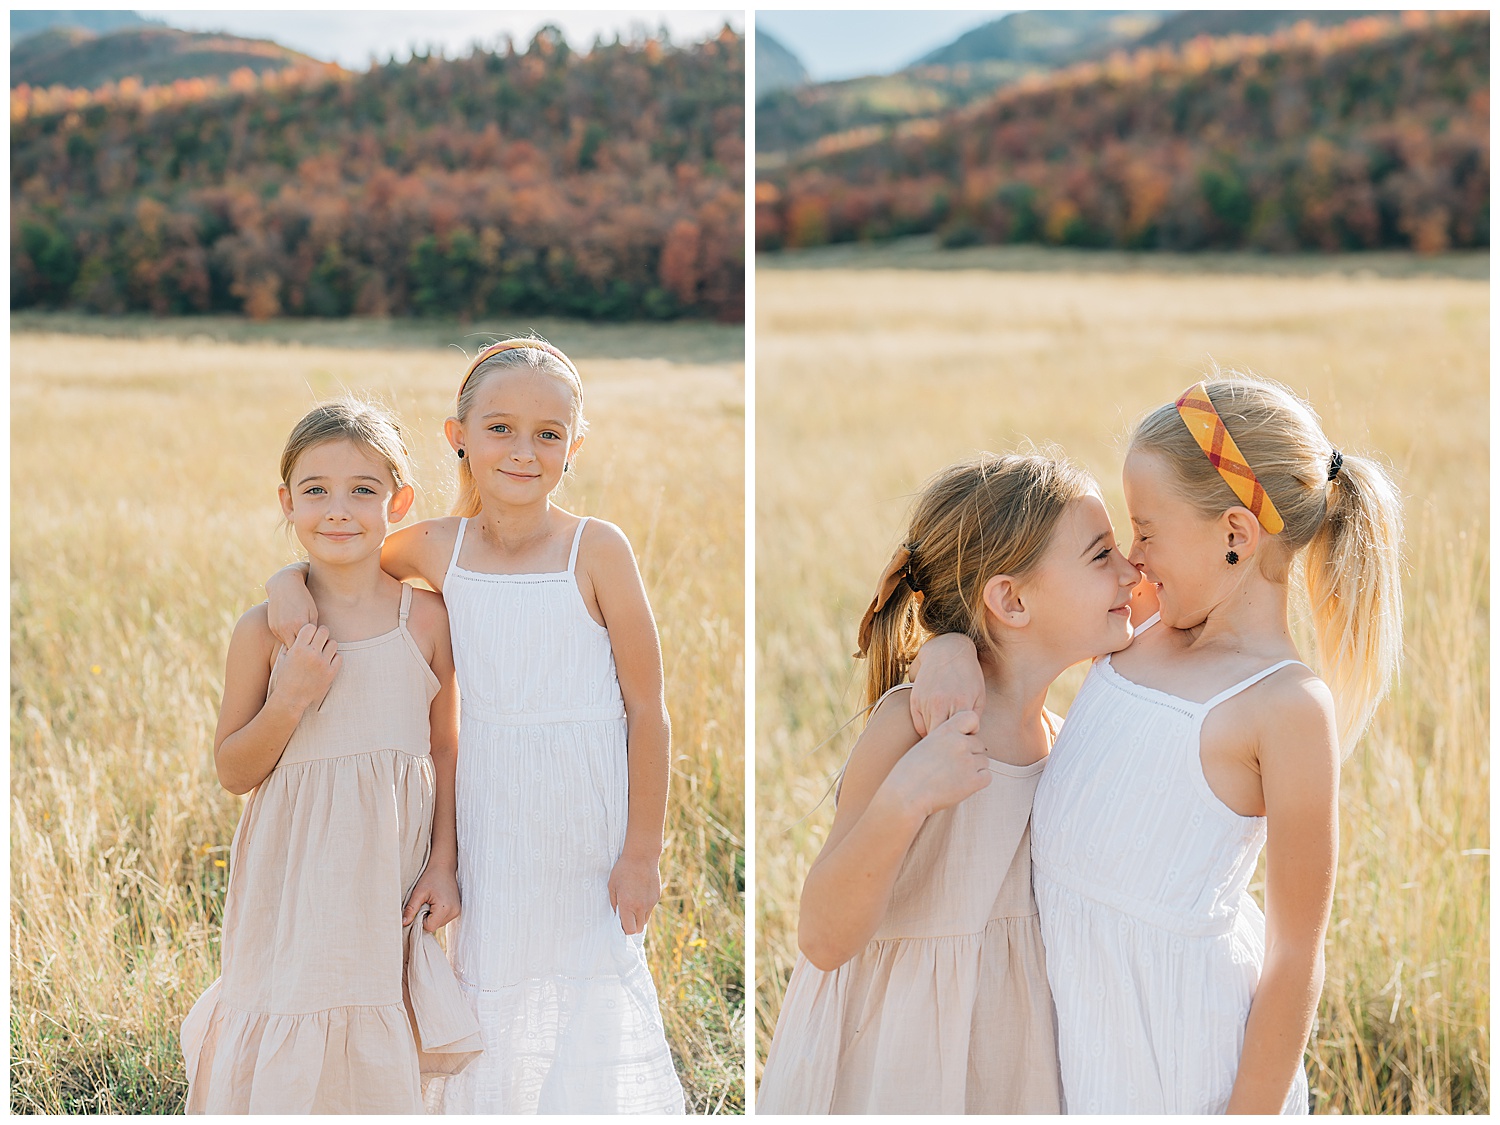 2 images of sisters standing side by side in fall family pictures. 